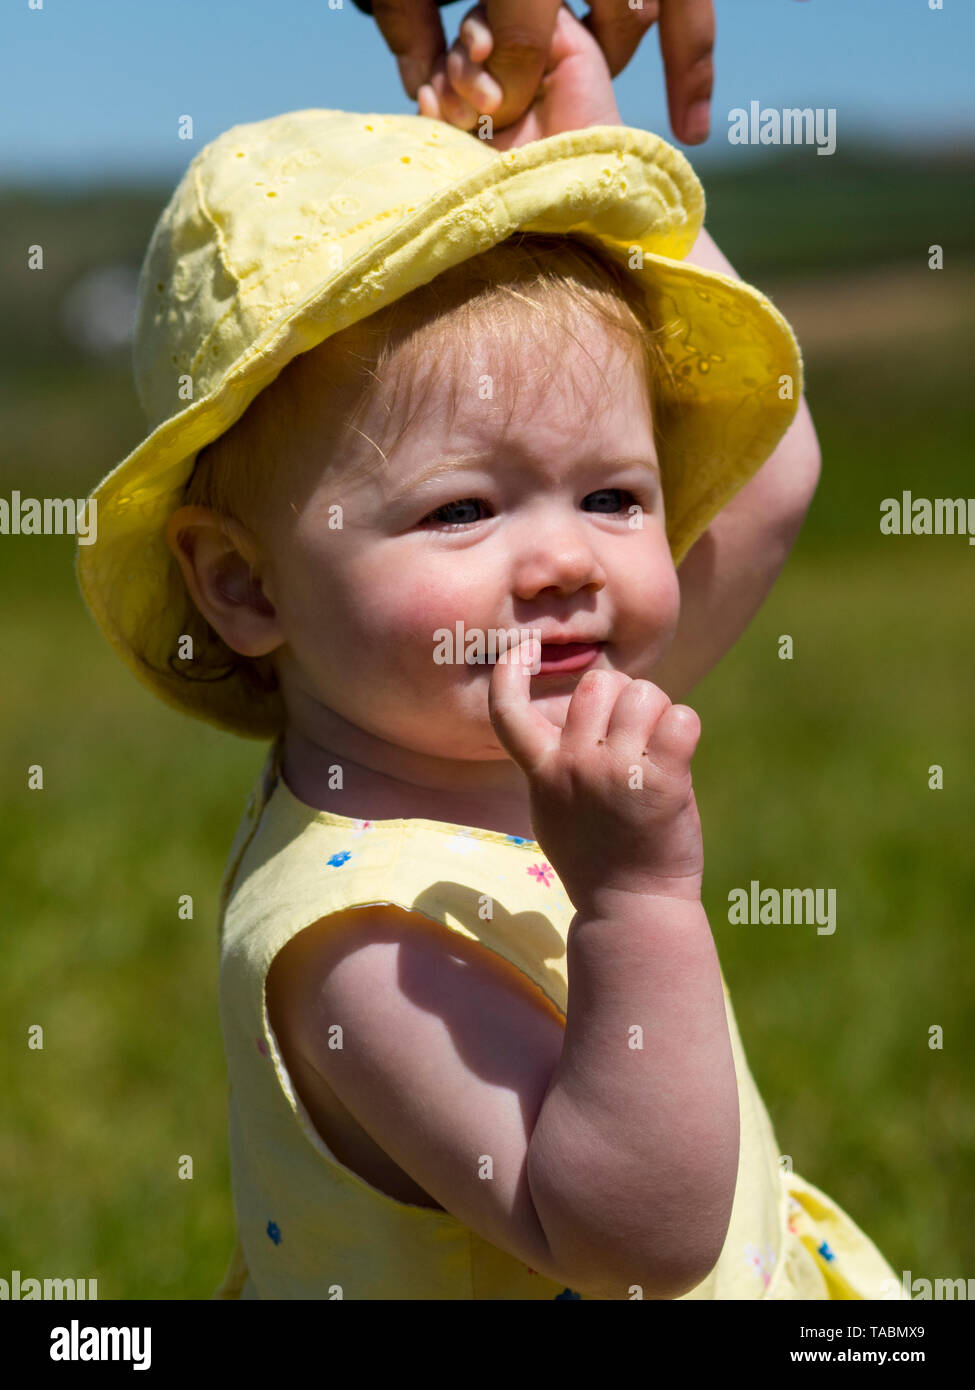 Baby girl in a yellow dress. Stock Photo